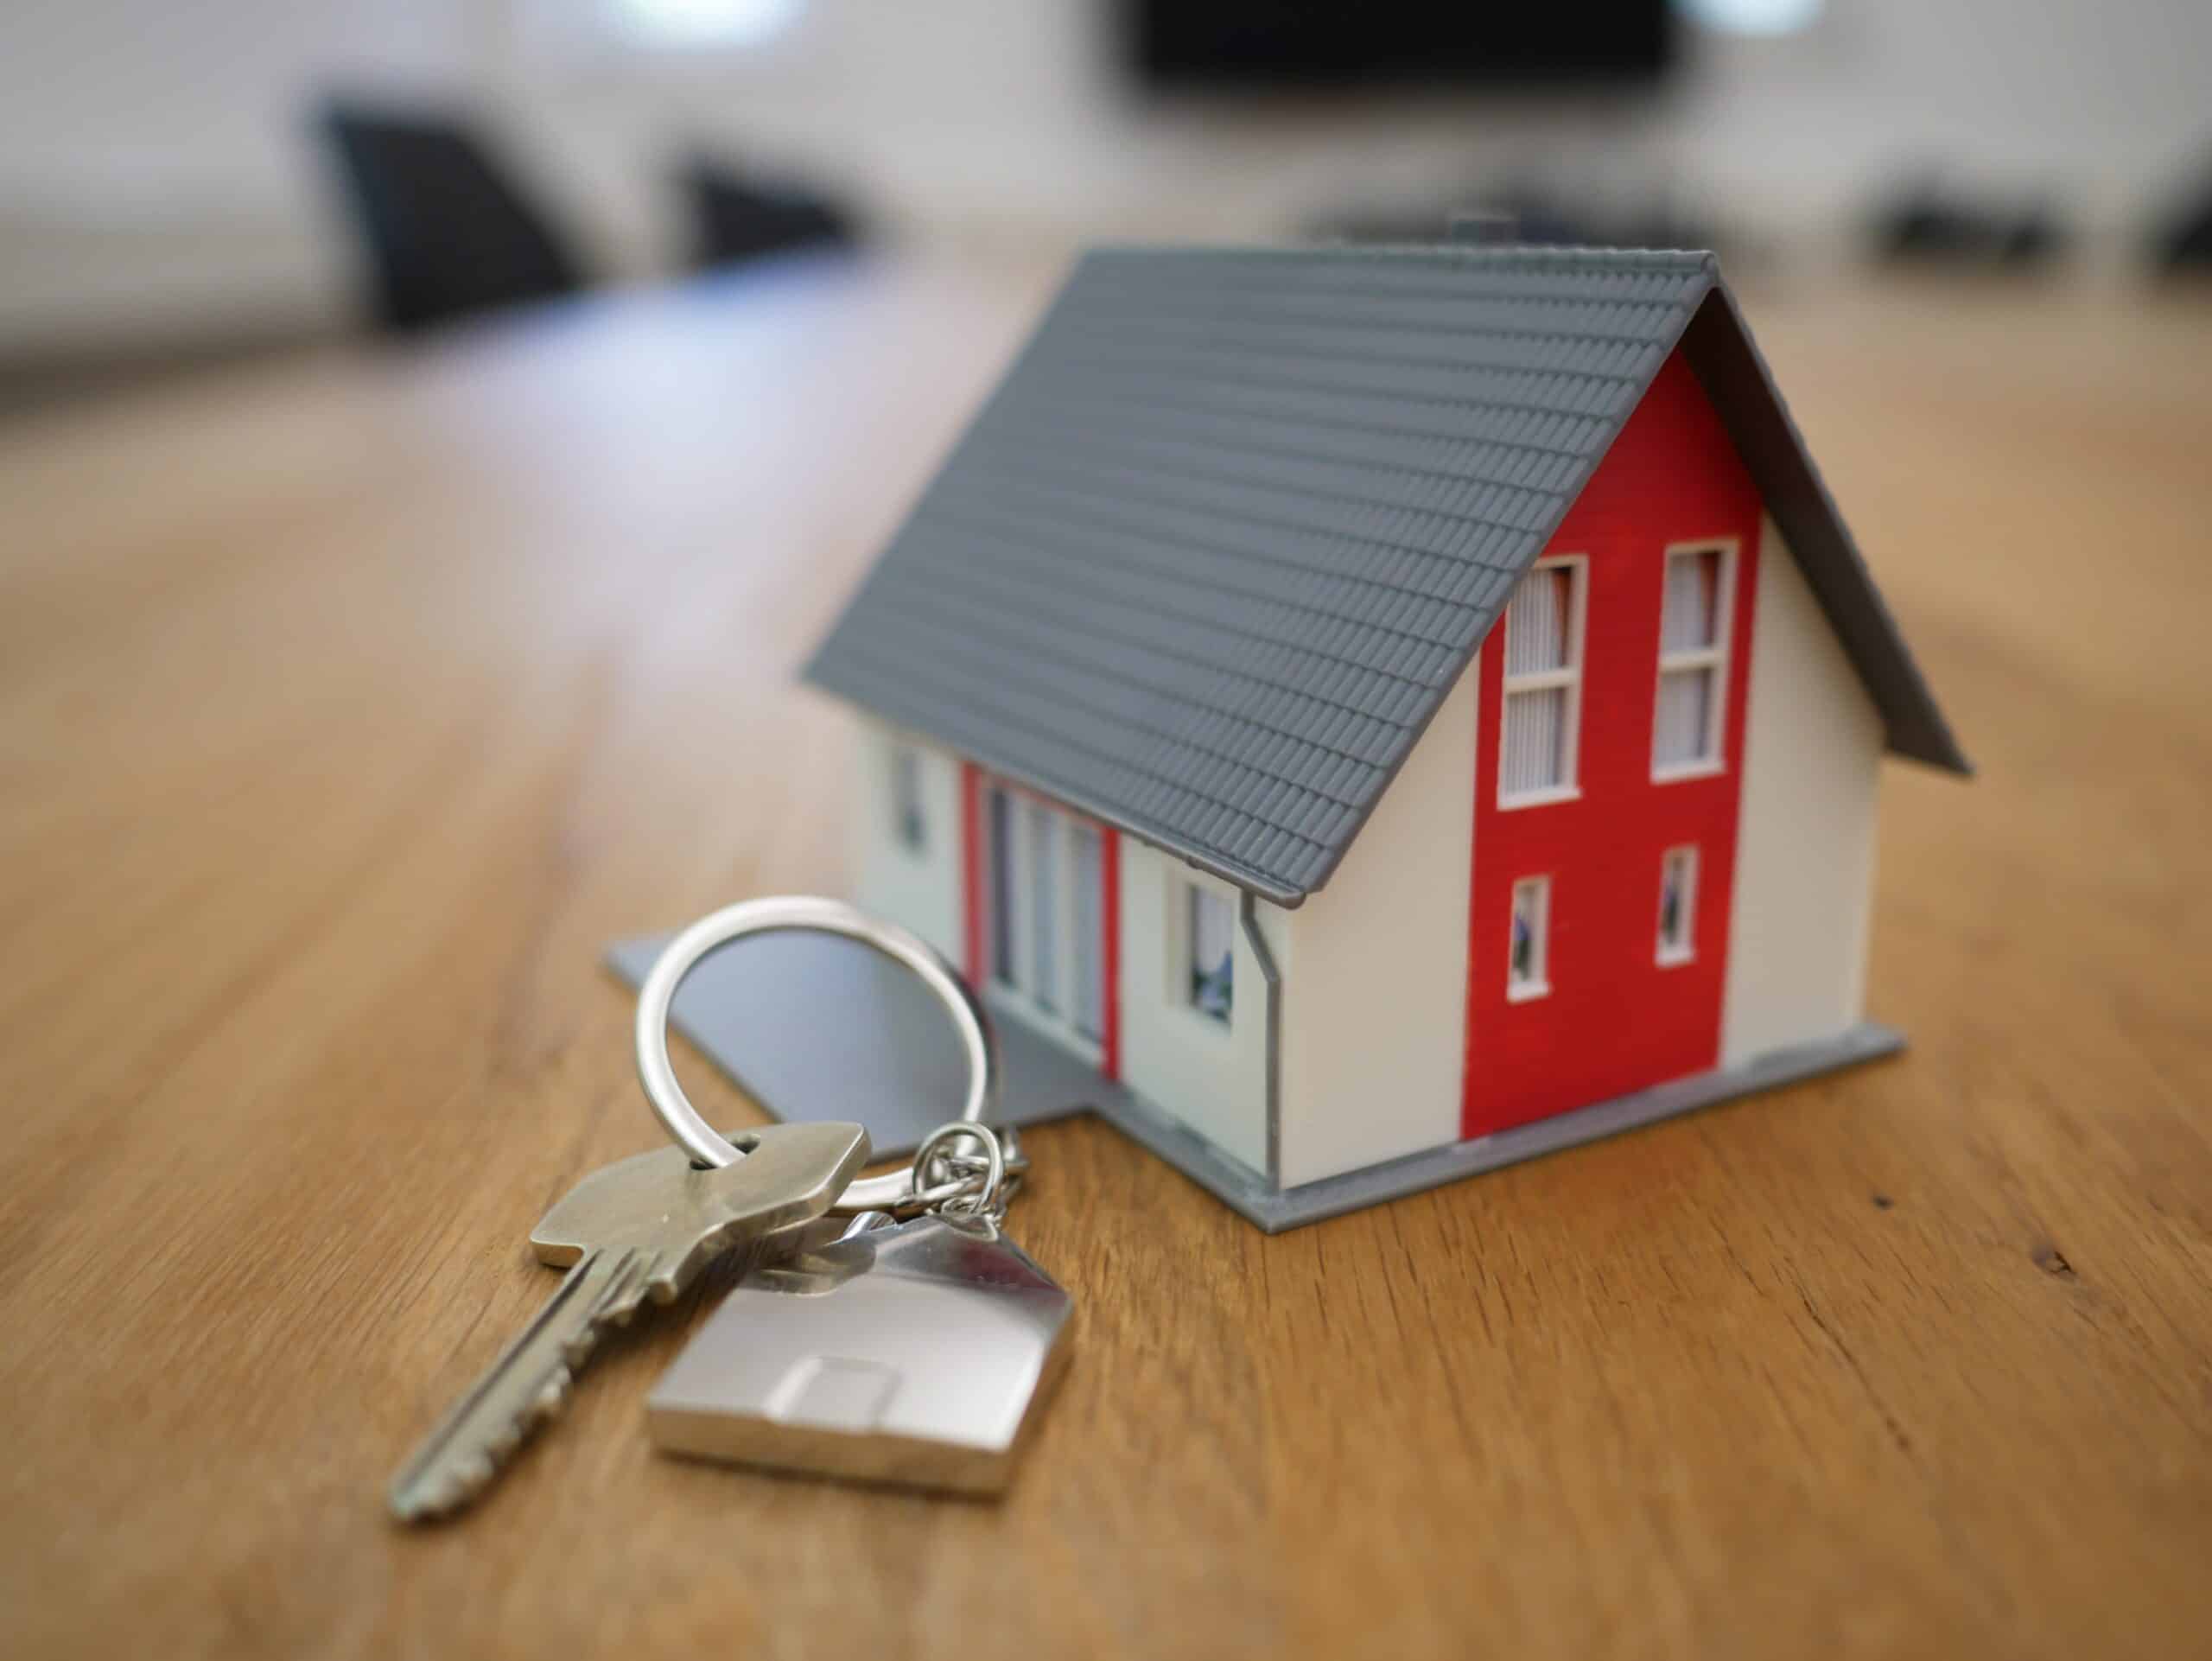 A tech model of a house with keys on a table.